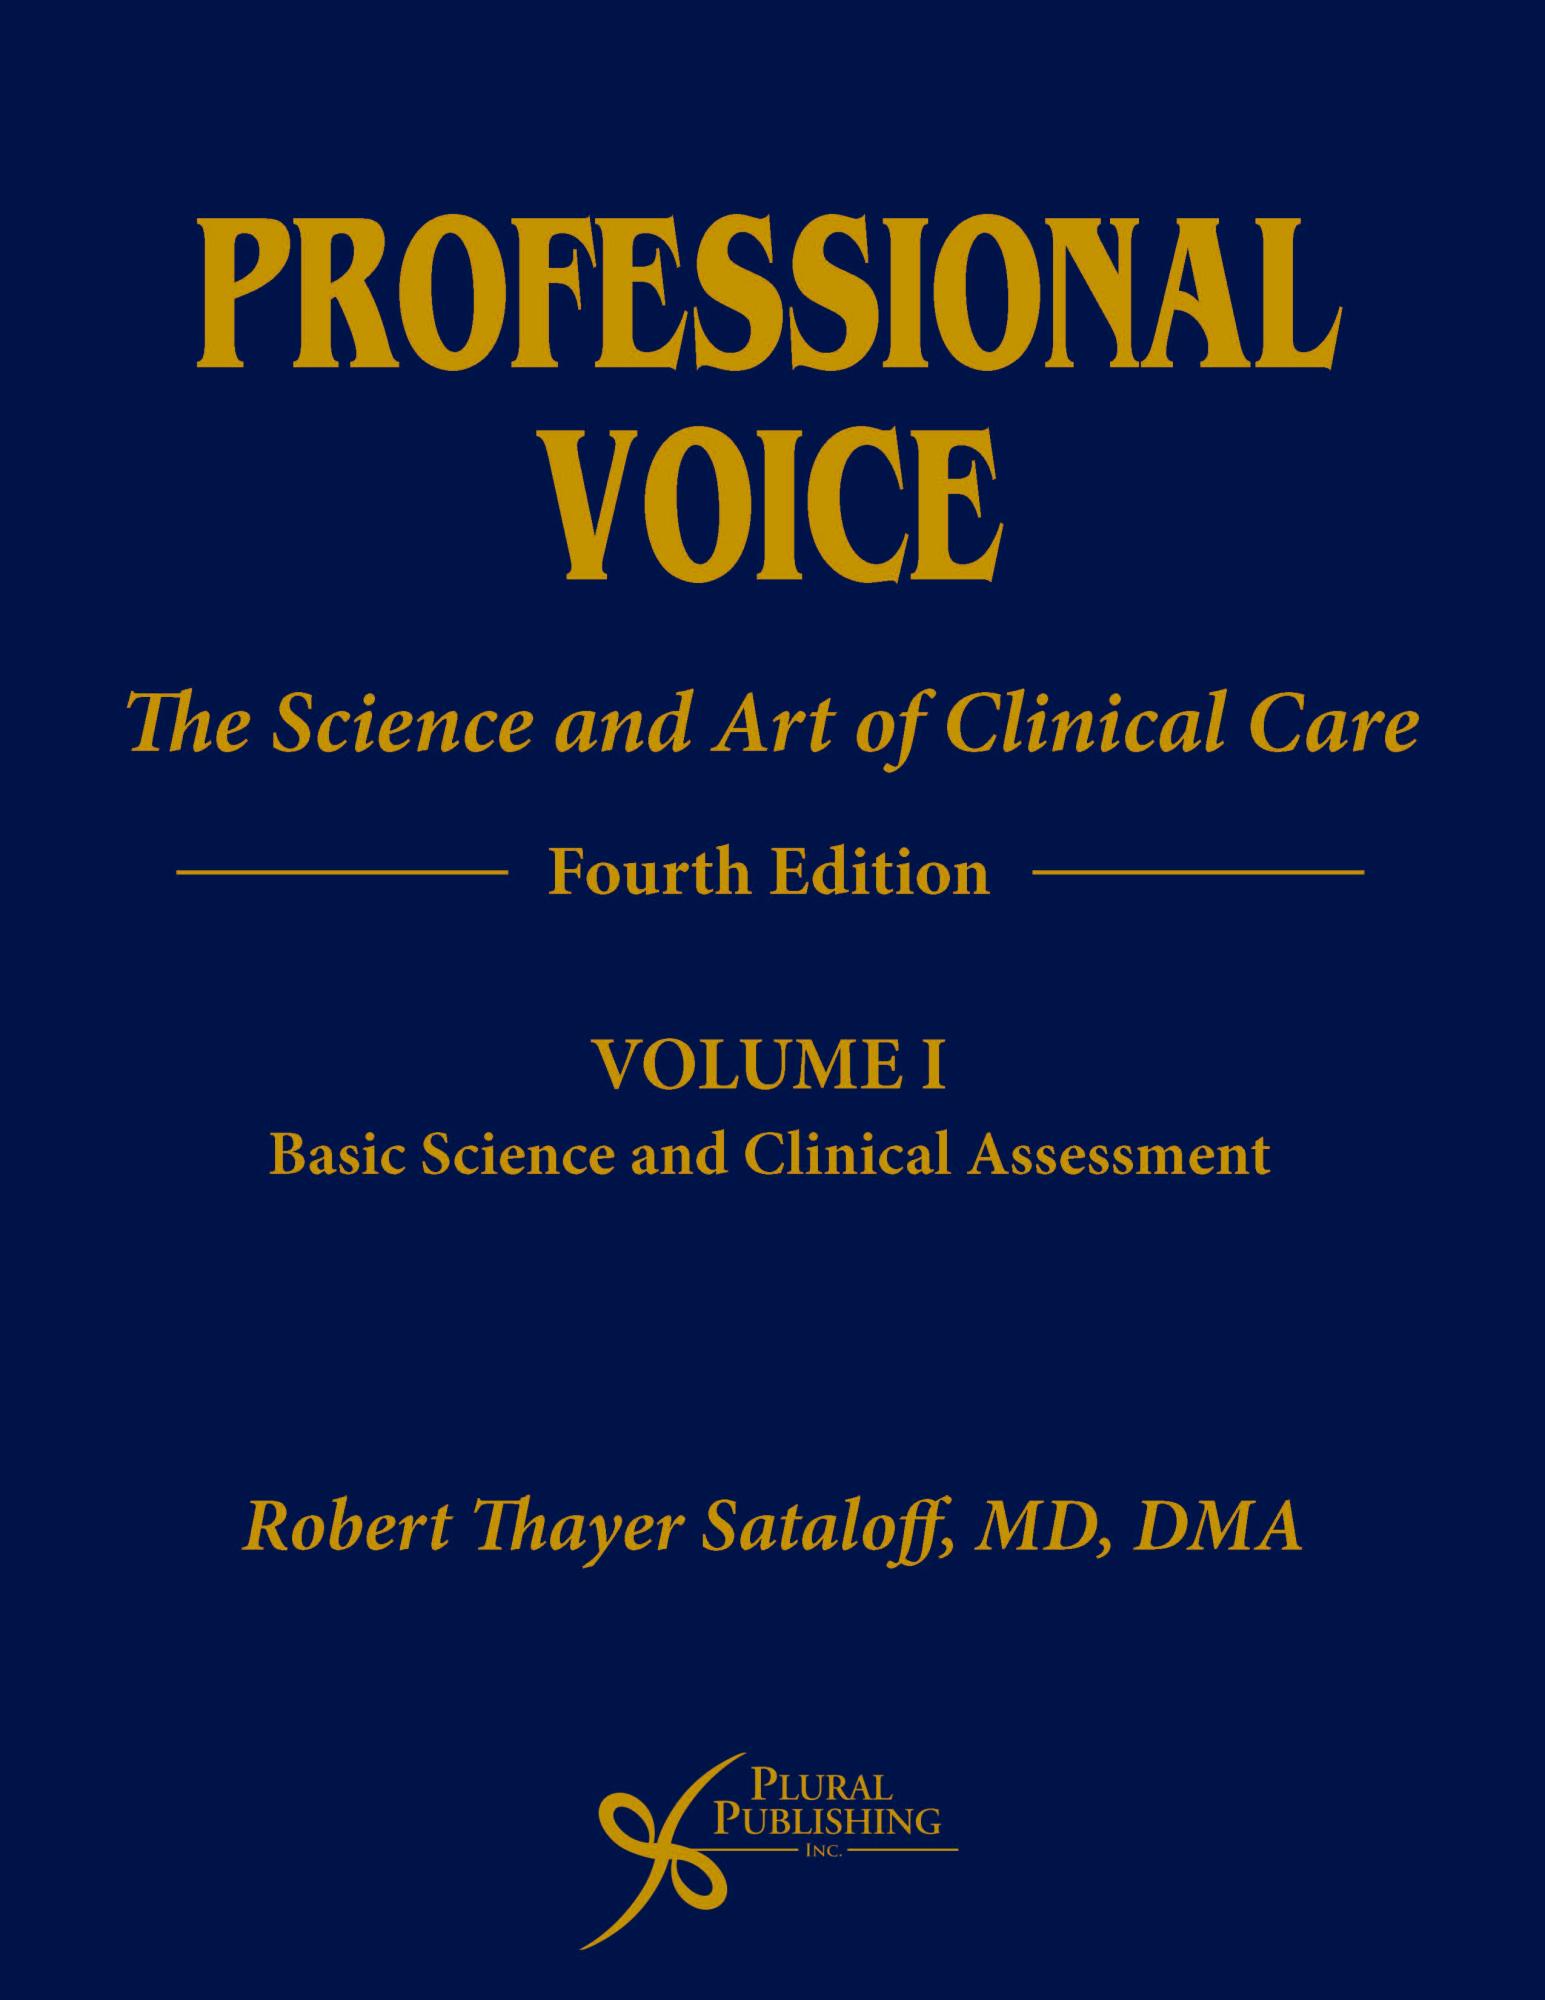 Professional Voice: The Science and Art of Clinical Care, 4th edition